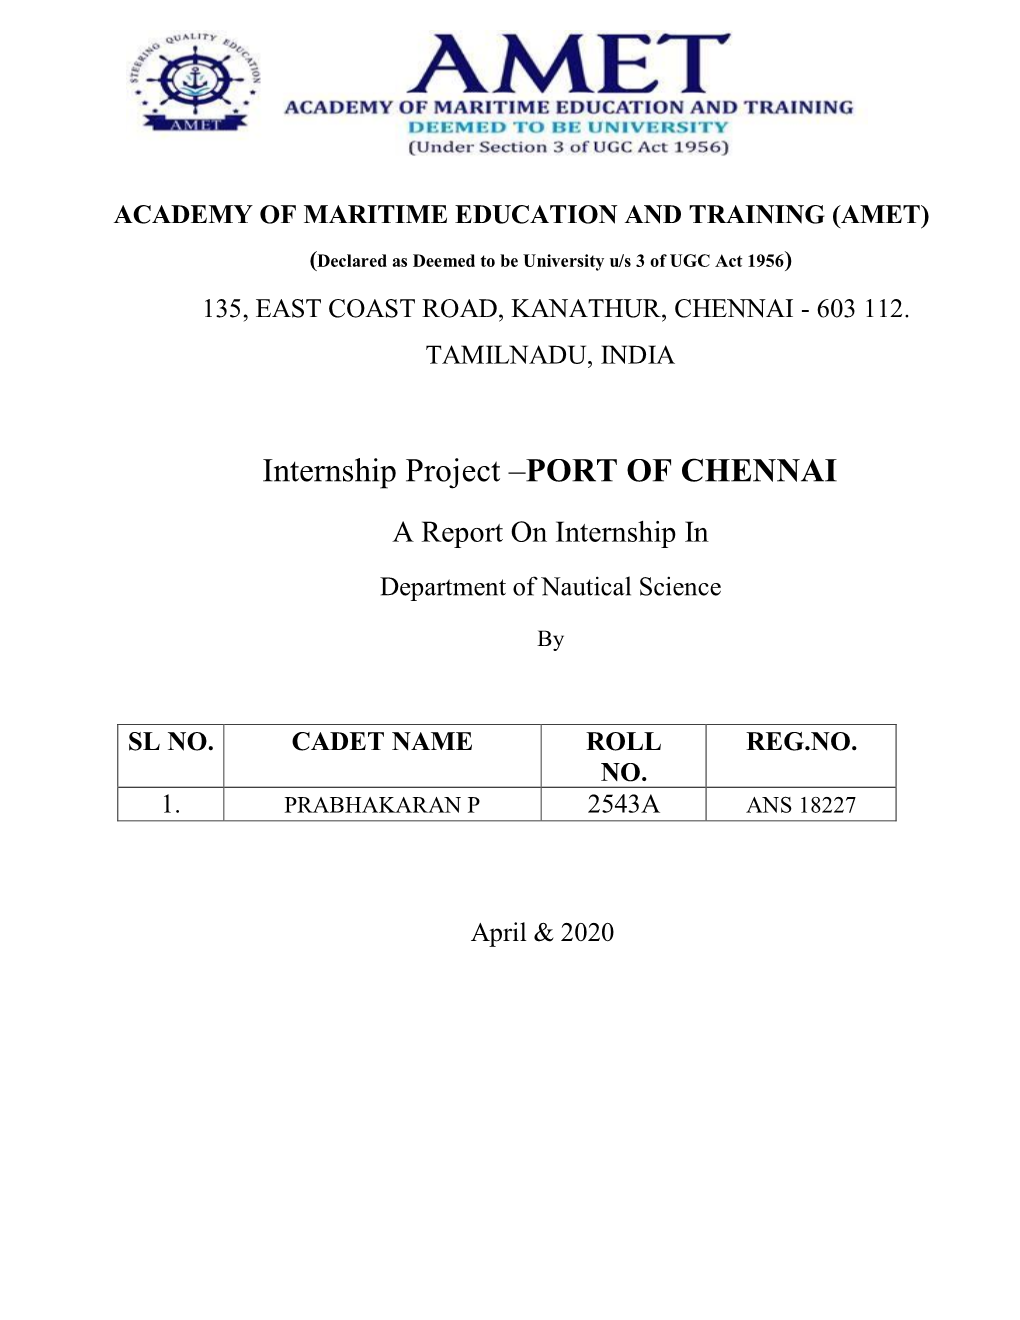 Internship Project –PORT of CHENNAI a Report on Internship in Department of Nautical Science